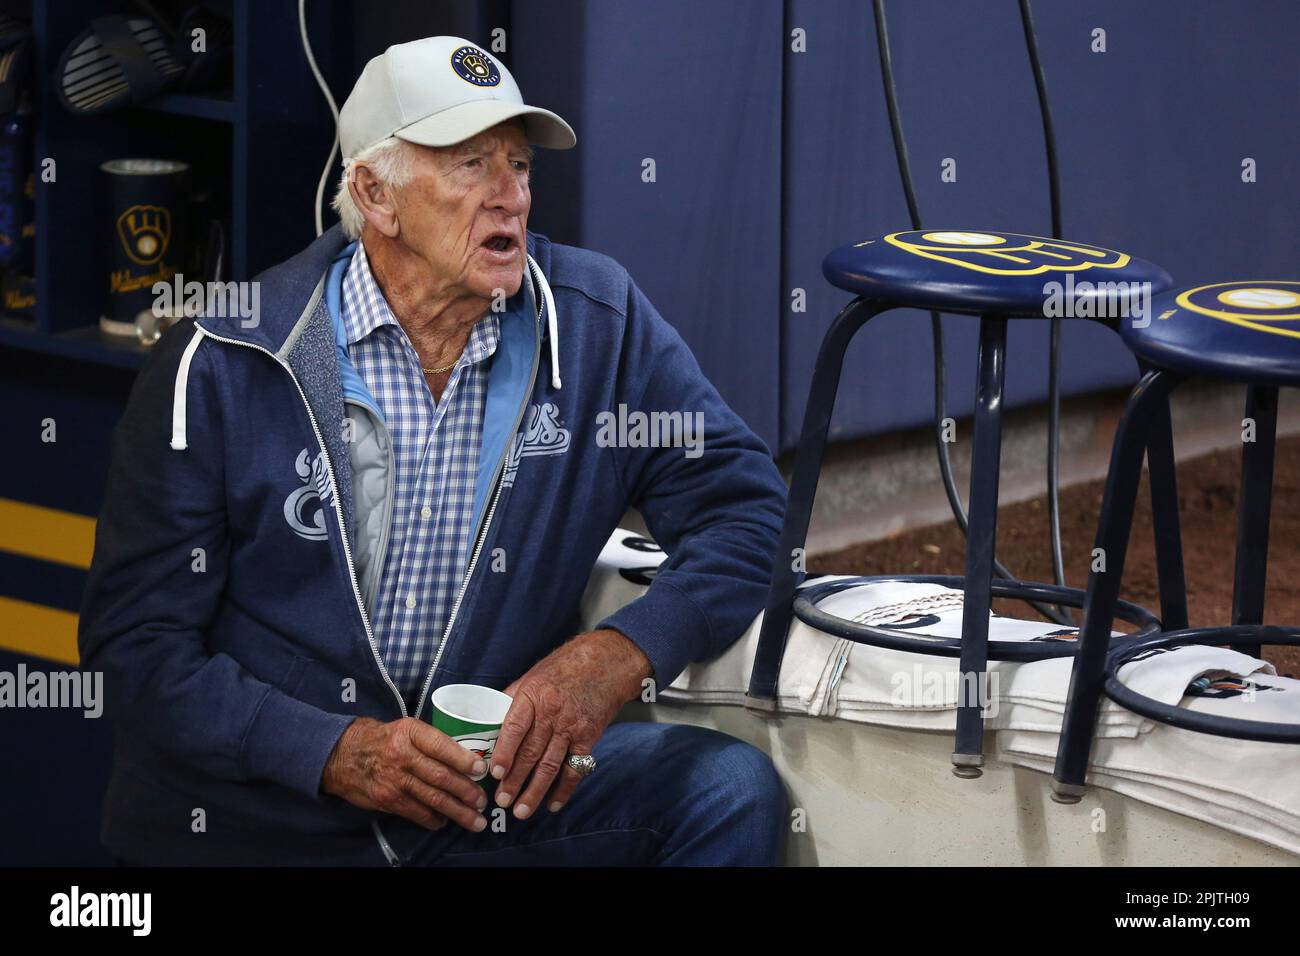 MILWAUKEE, WI - APRIL 03: Milwaukee Brewers play by play announcer Bob  Uecker watches batting practice during a game between the Milwaukee Brewers  and the New York Mets at American Family Field